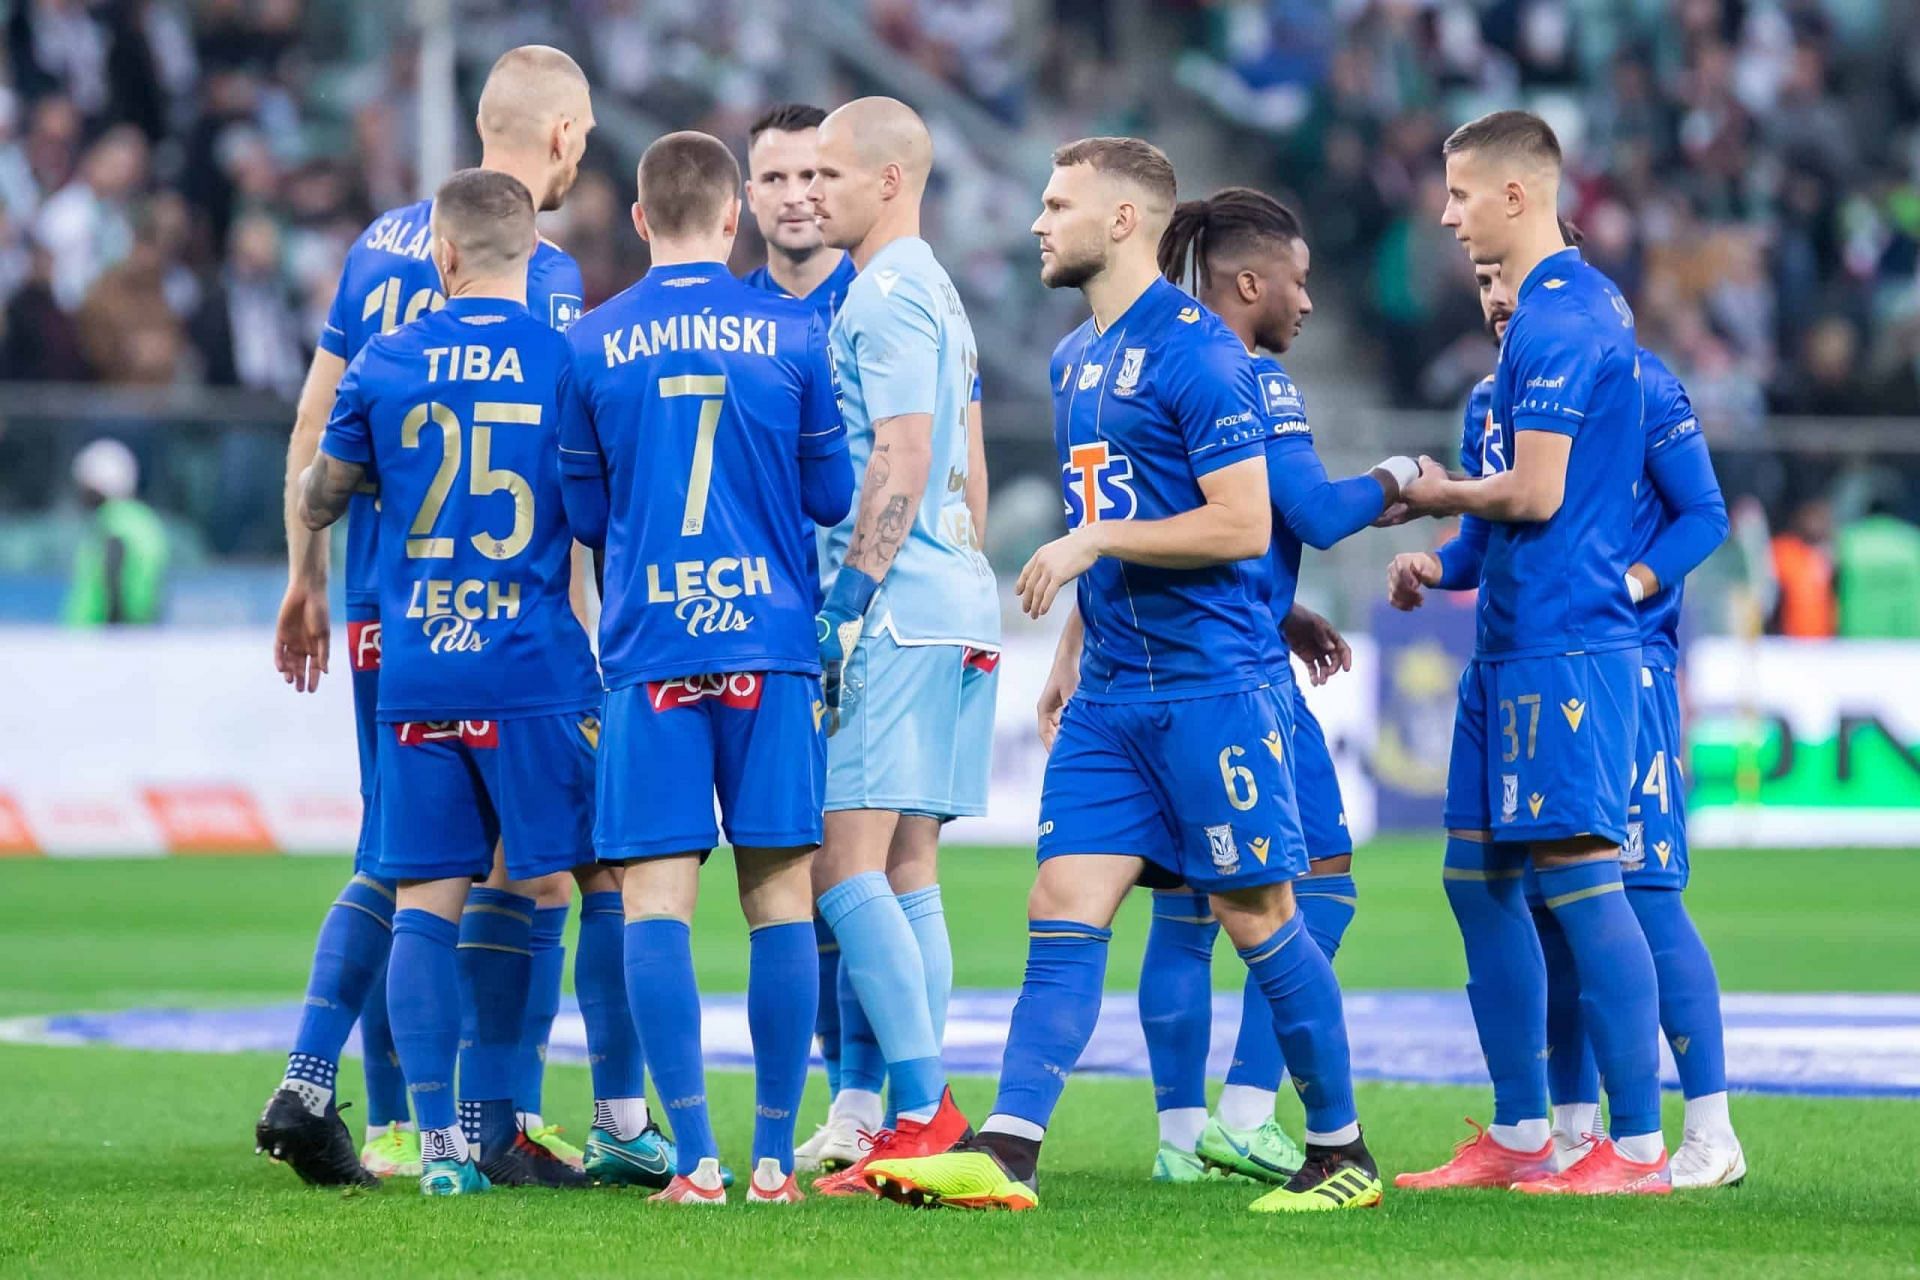 Lech Poznan will face Qarabag in UEFA Champions League qualifying on Tuesday.